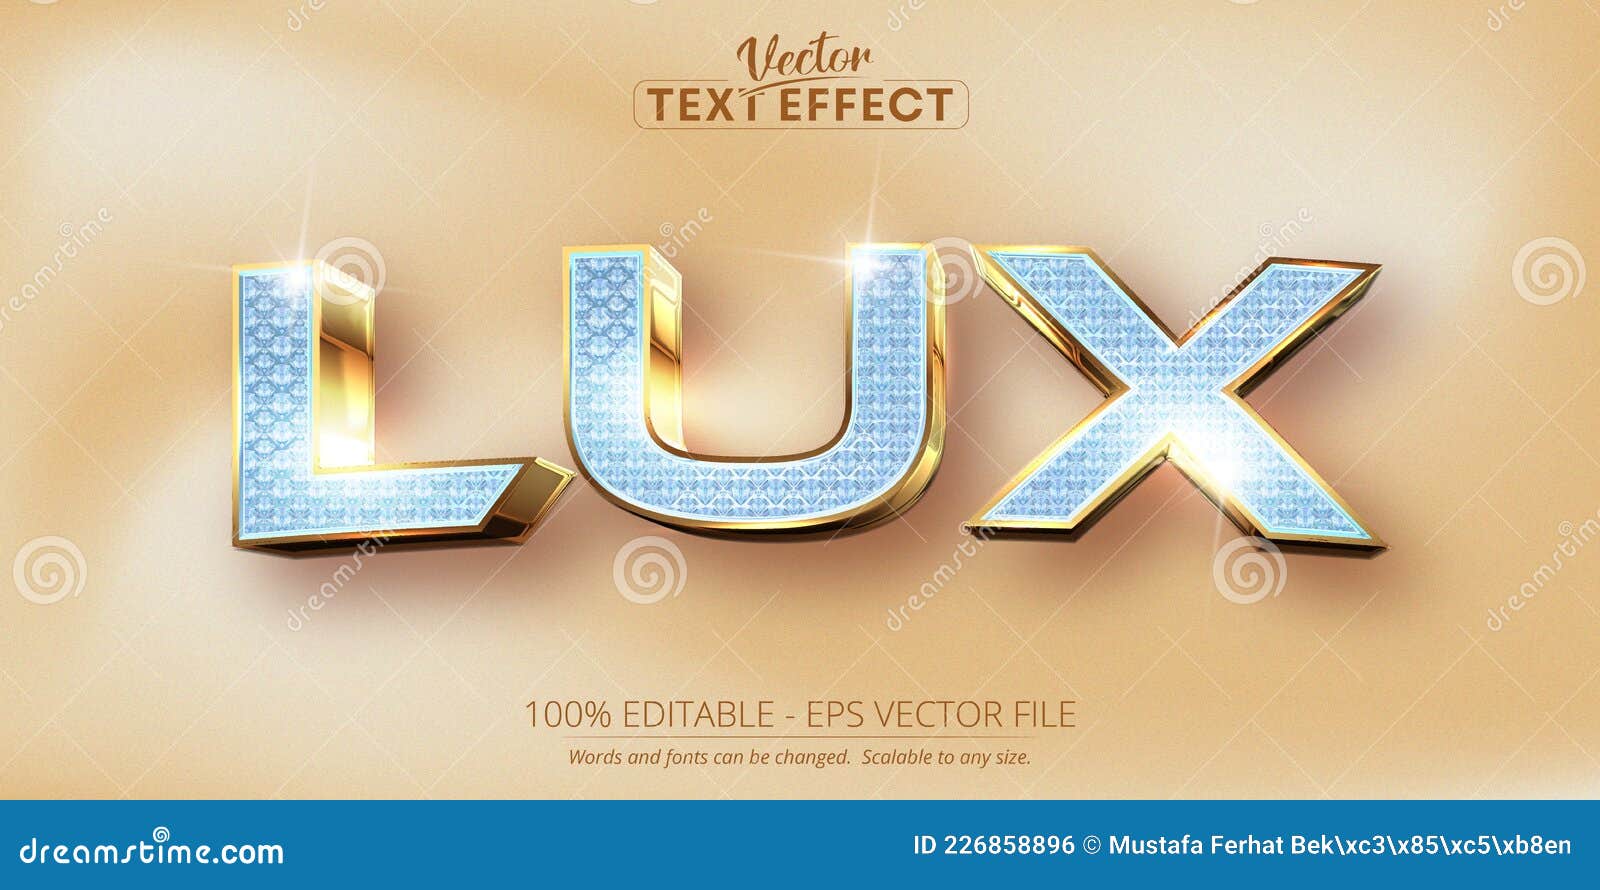 lux text, shiny diamond textured and shiny gold style editable text effect